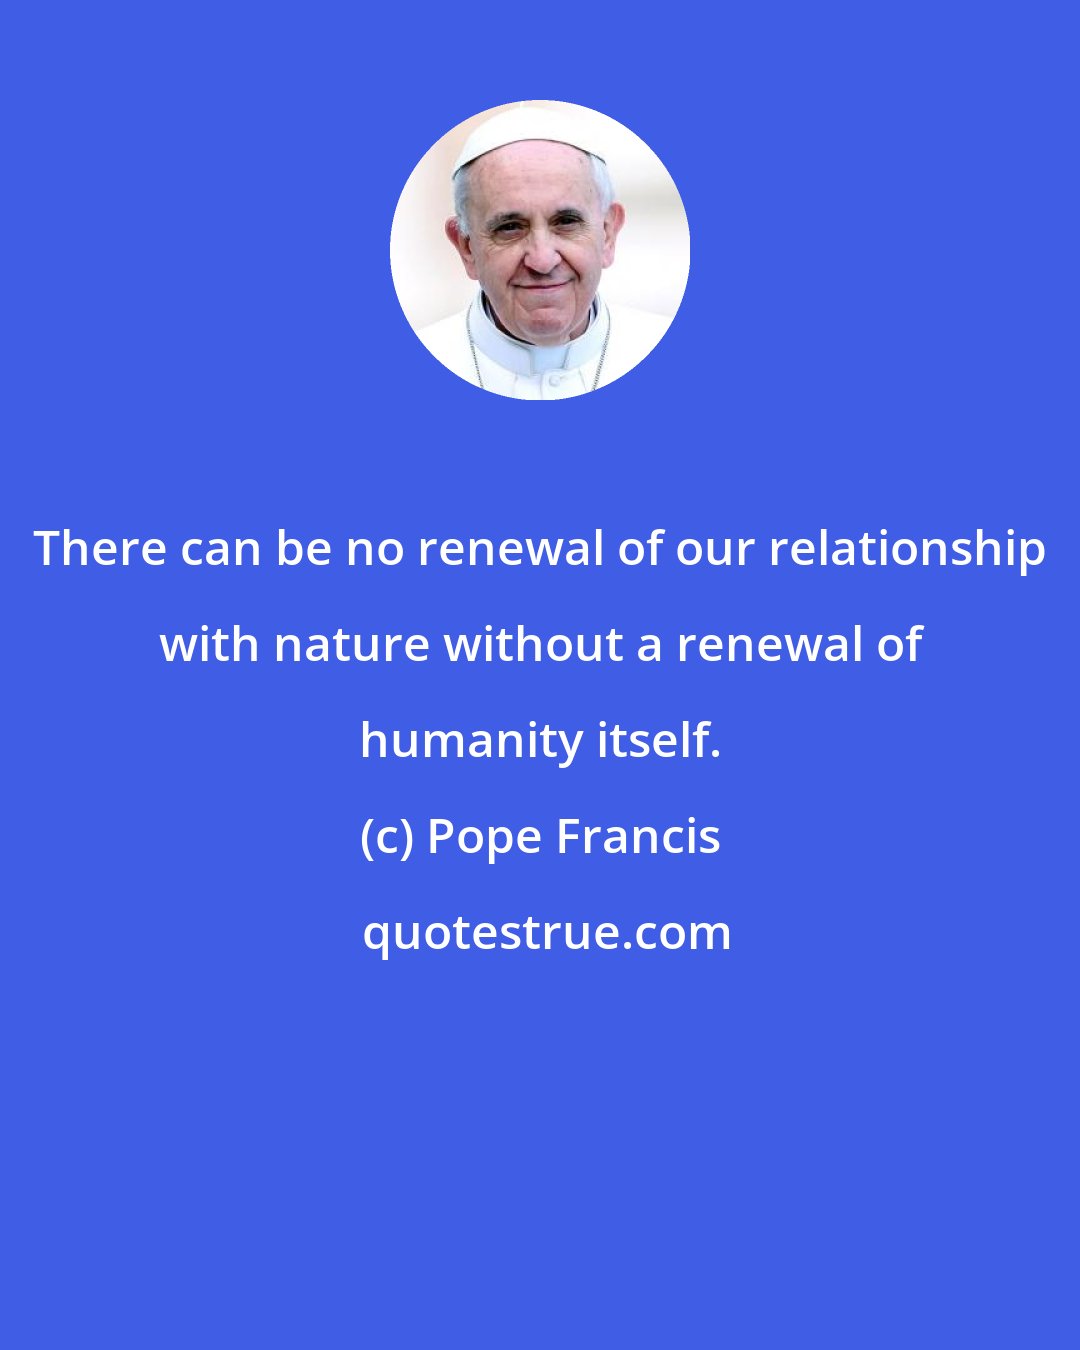 Pope Francis: There can be no renewal of our relationship with nature without a renewal of humanity itself.